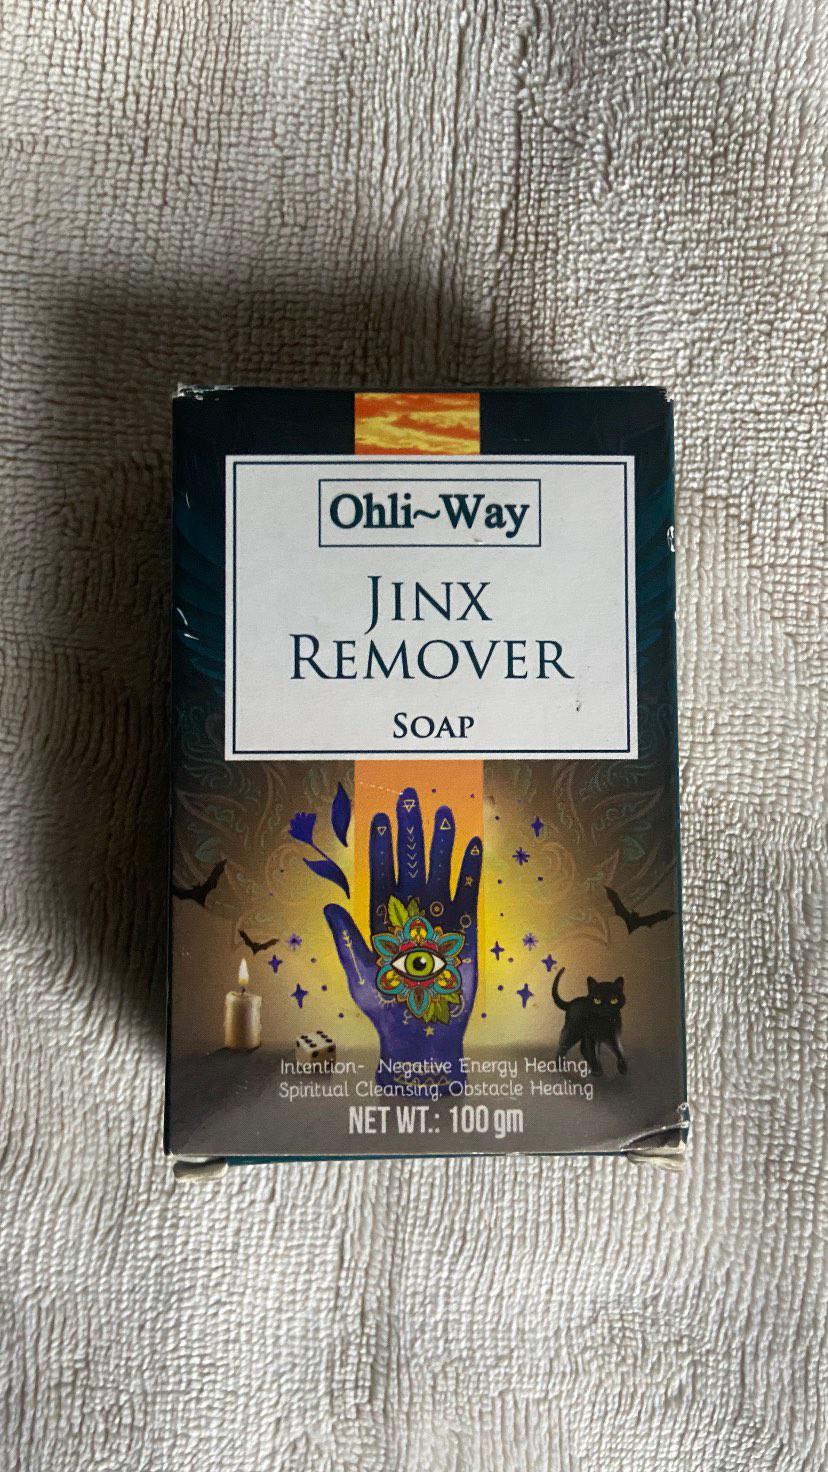  Jinx Remover Soap -  available at Amazing Creations Products . Grab yours for $5.99 today!